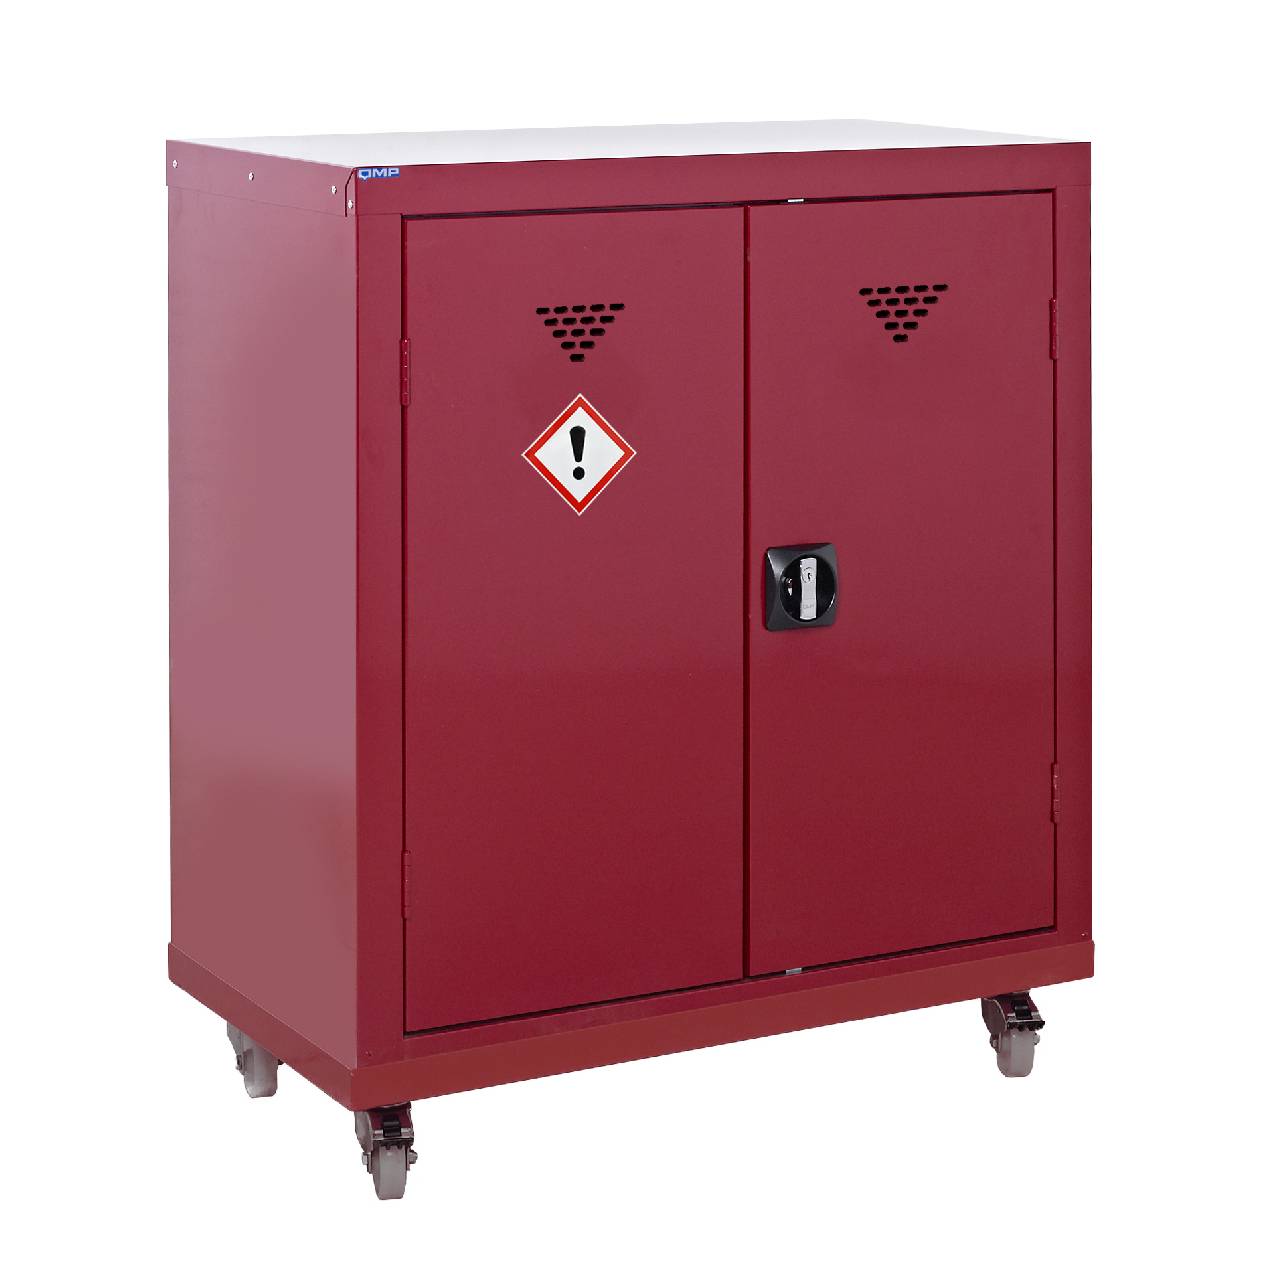 QMP Pesticide & Agrochemical Mobile Cabinets - 1040H x 900W x 460D mm